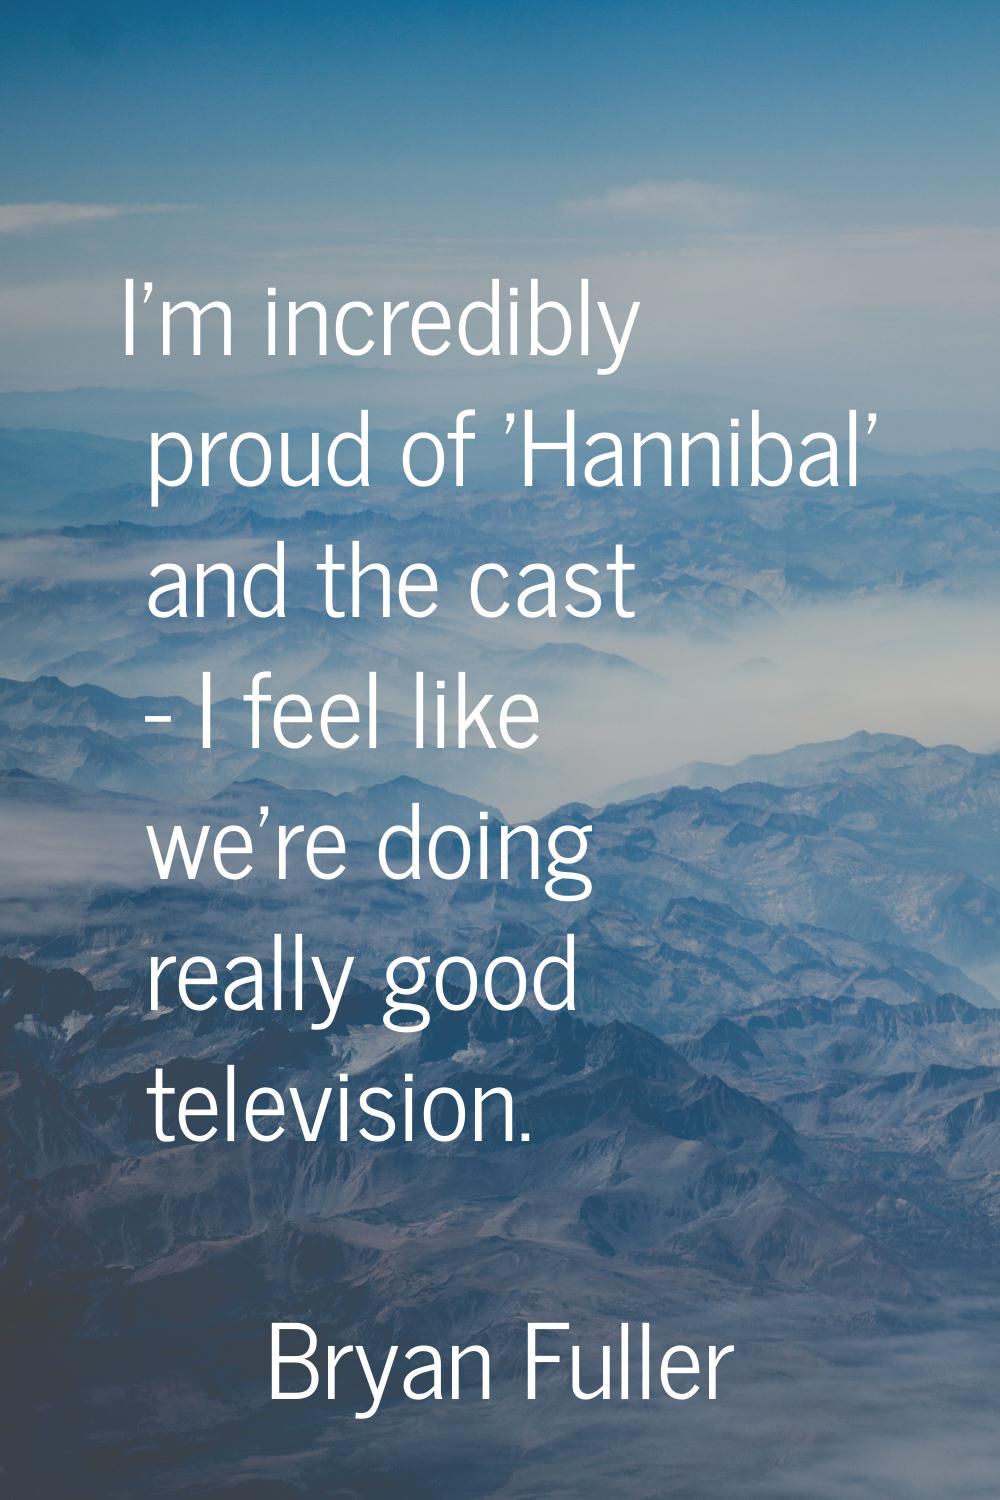 I'm incredibly proud of 'Hannibal' and the cast - I feel like we're doing really good television.